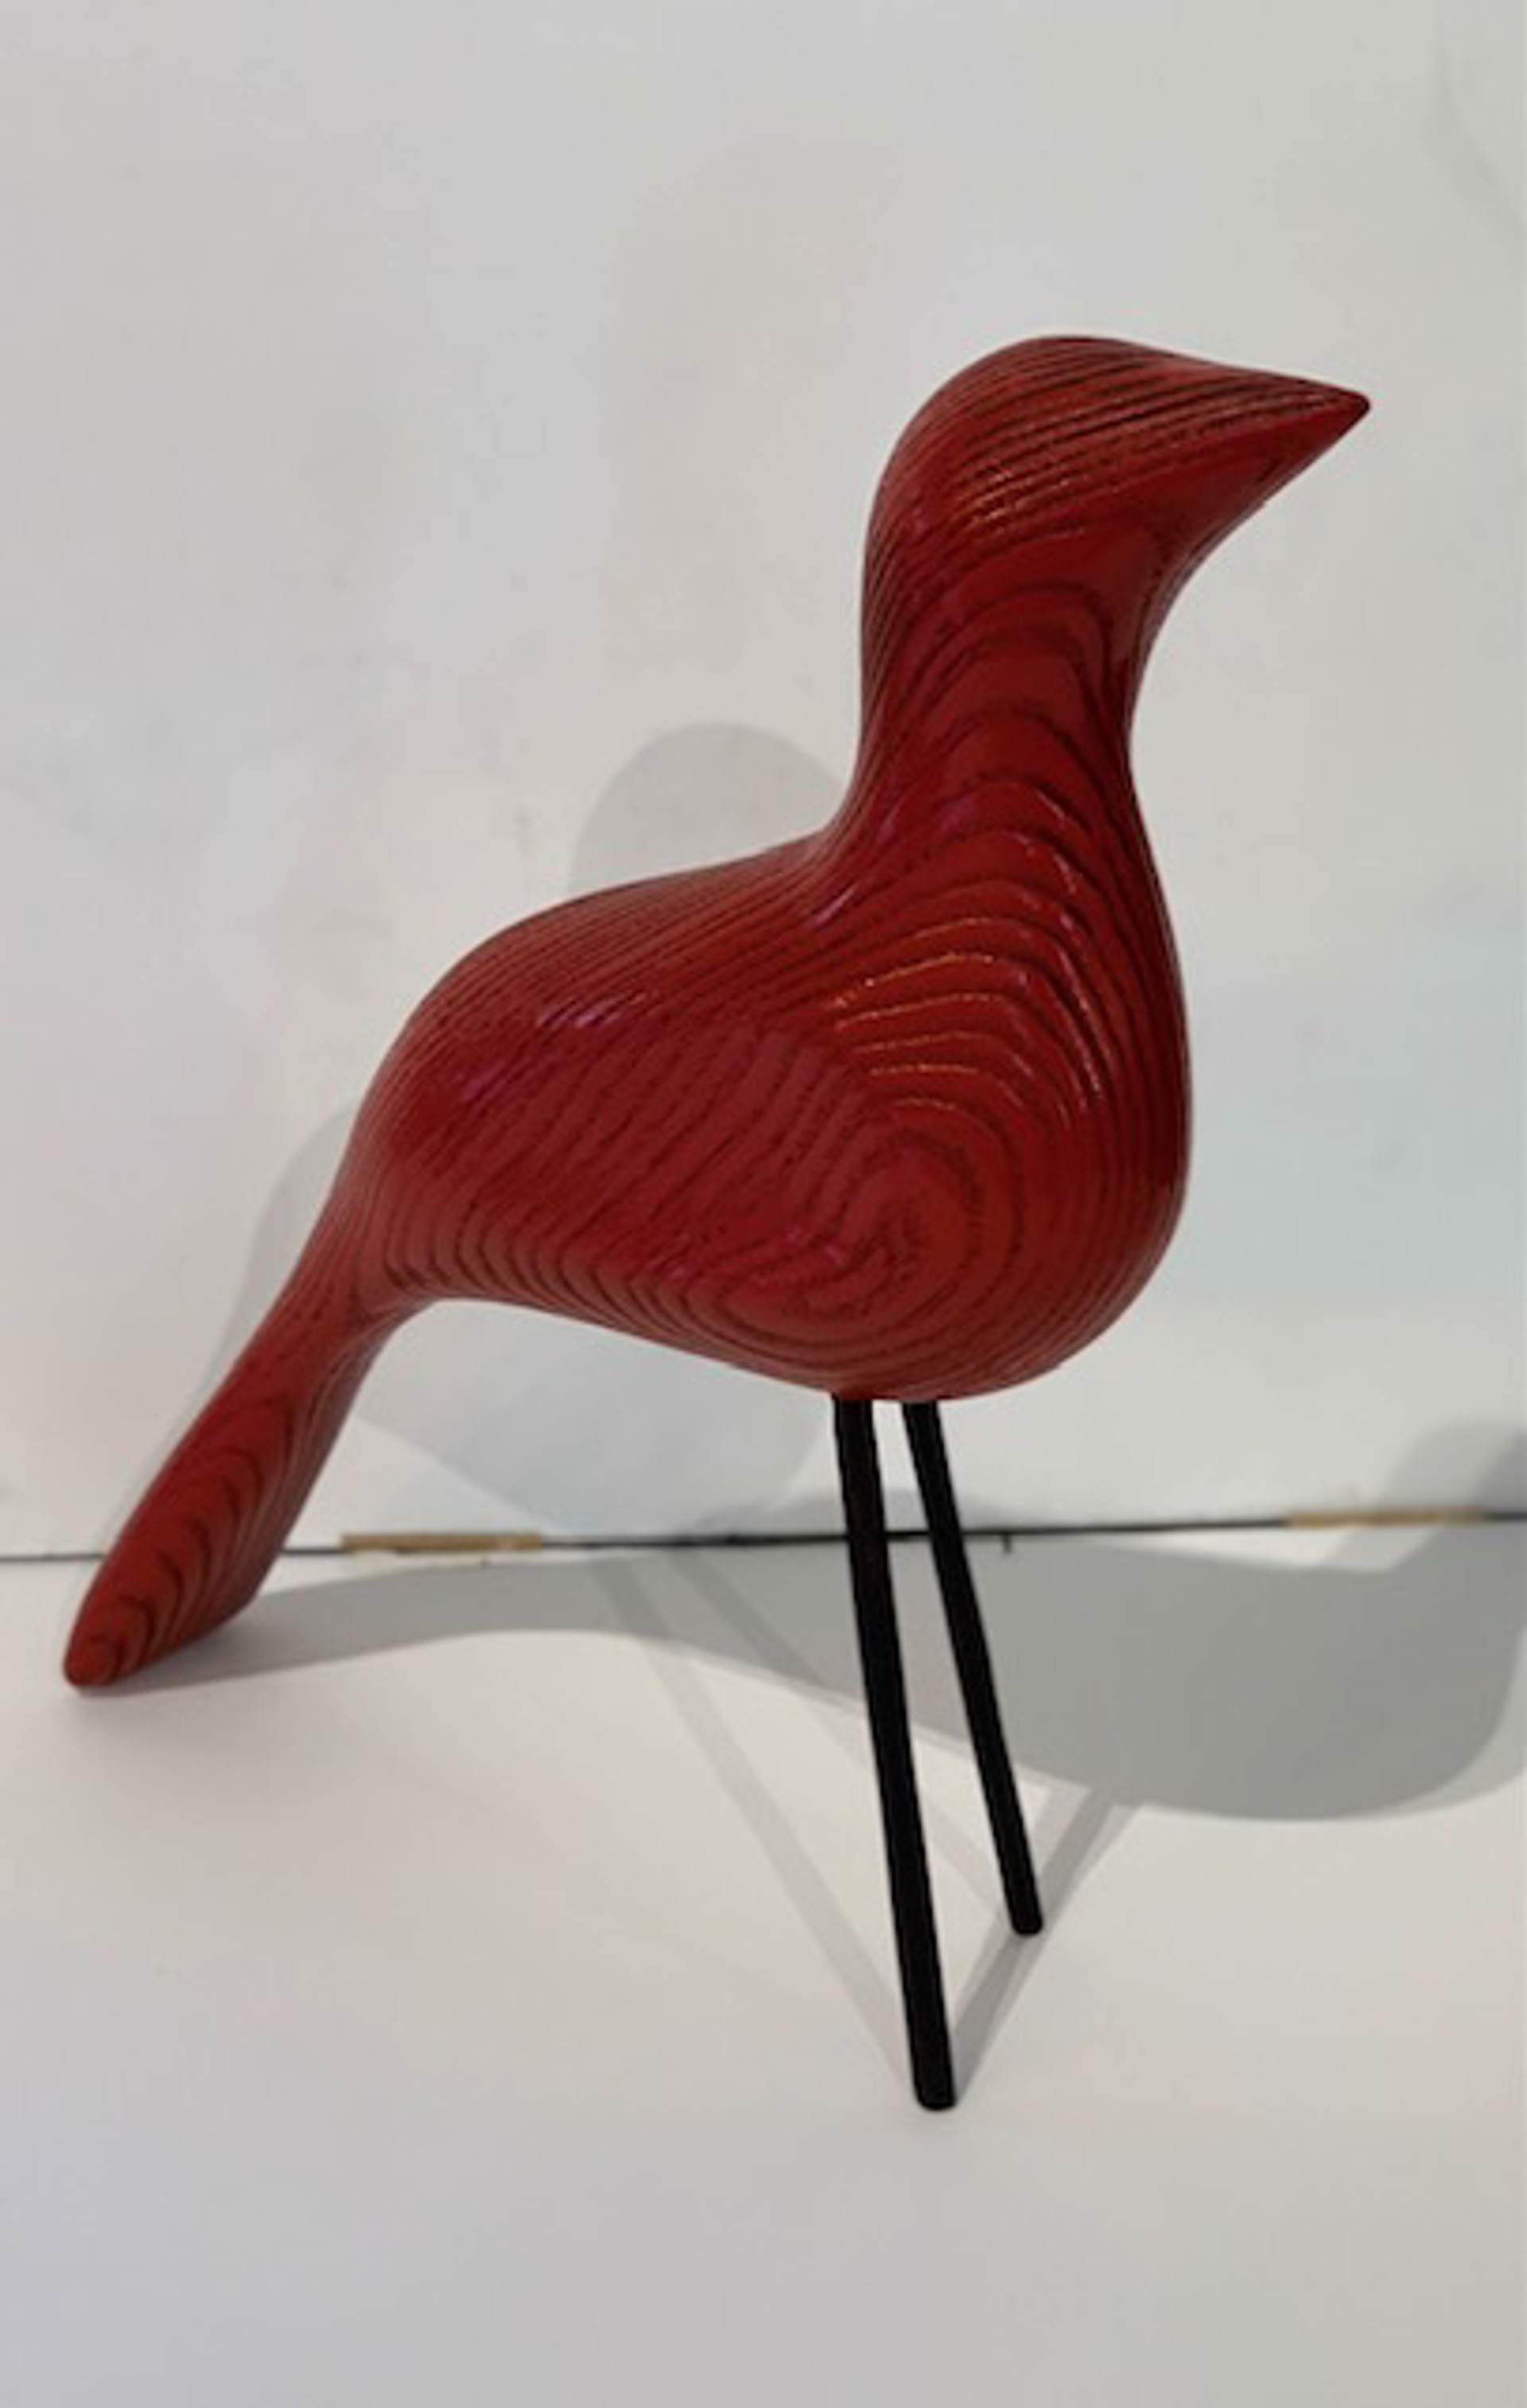 Standing Red Bird C by Barry Harrison